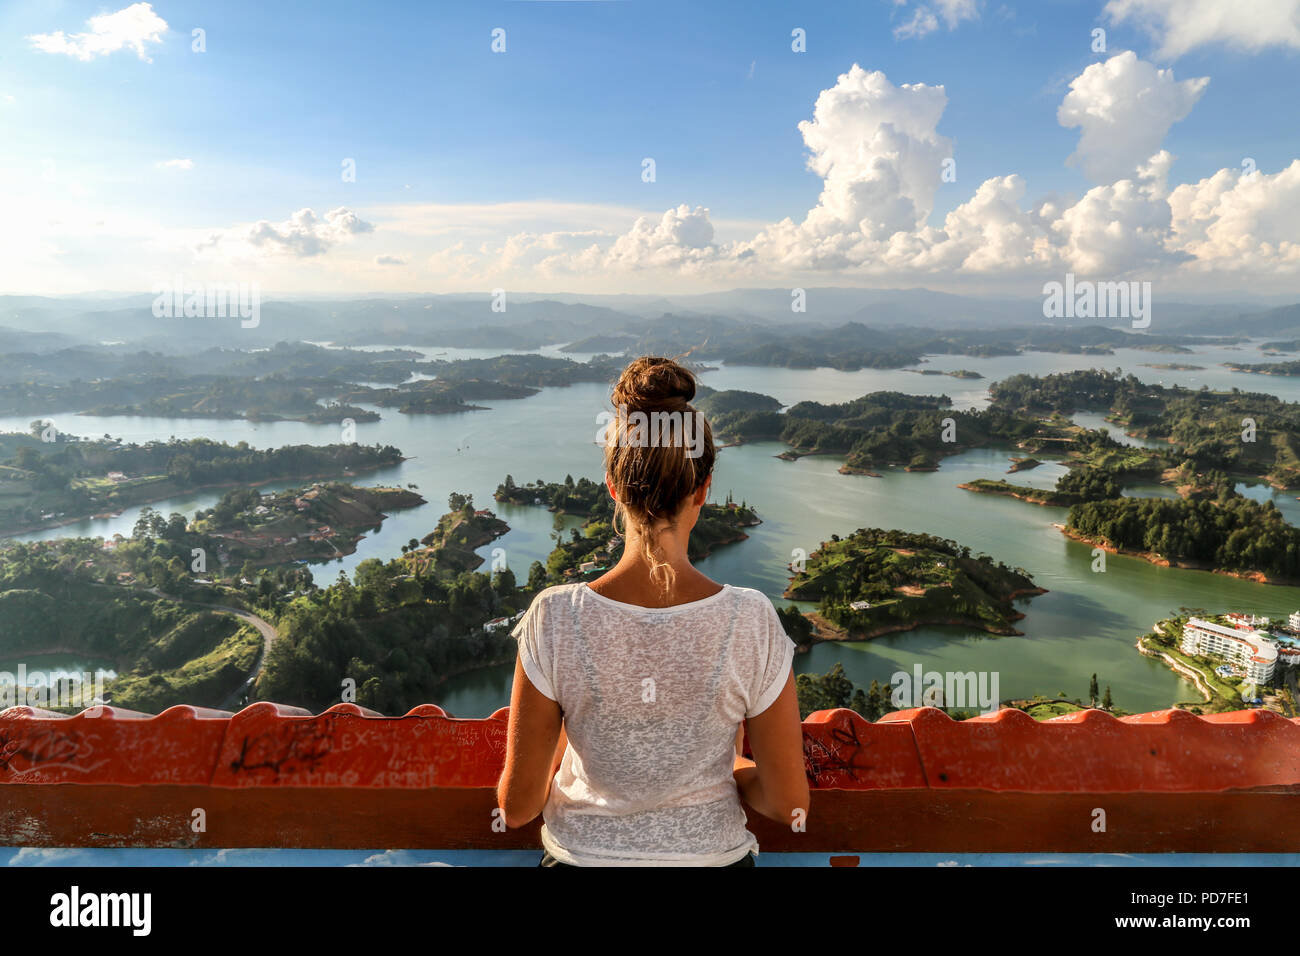 Looking out at the beautiful Island view of the Guatape region after a long hike to the top of the viewpoint Stock Photo